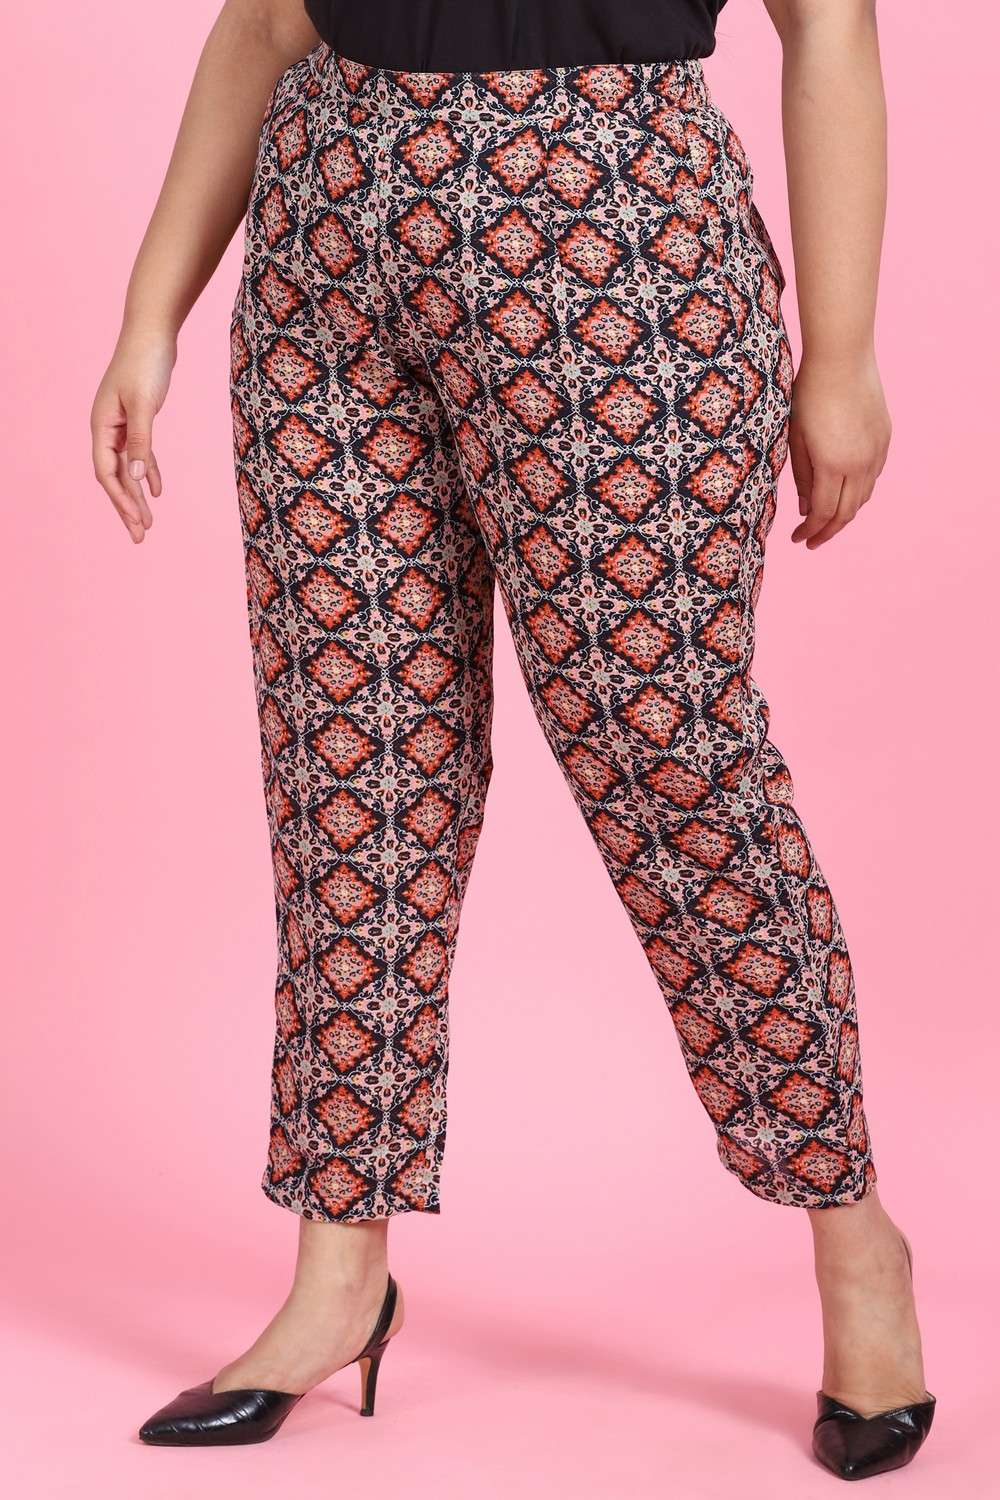 Buy Kulu Women's Multi Color Polyester Cotton Printed Trousers at Amazon.in